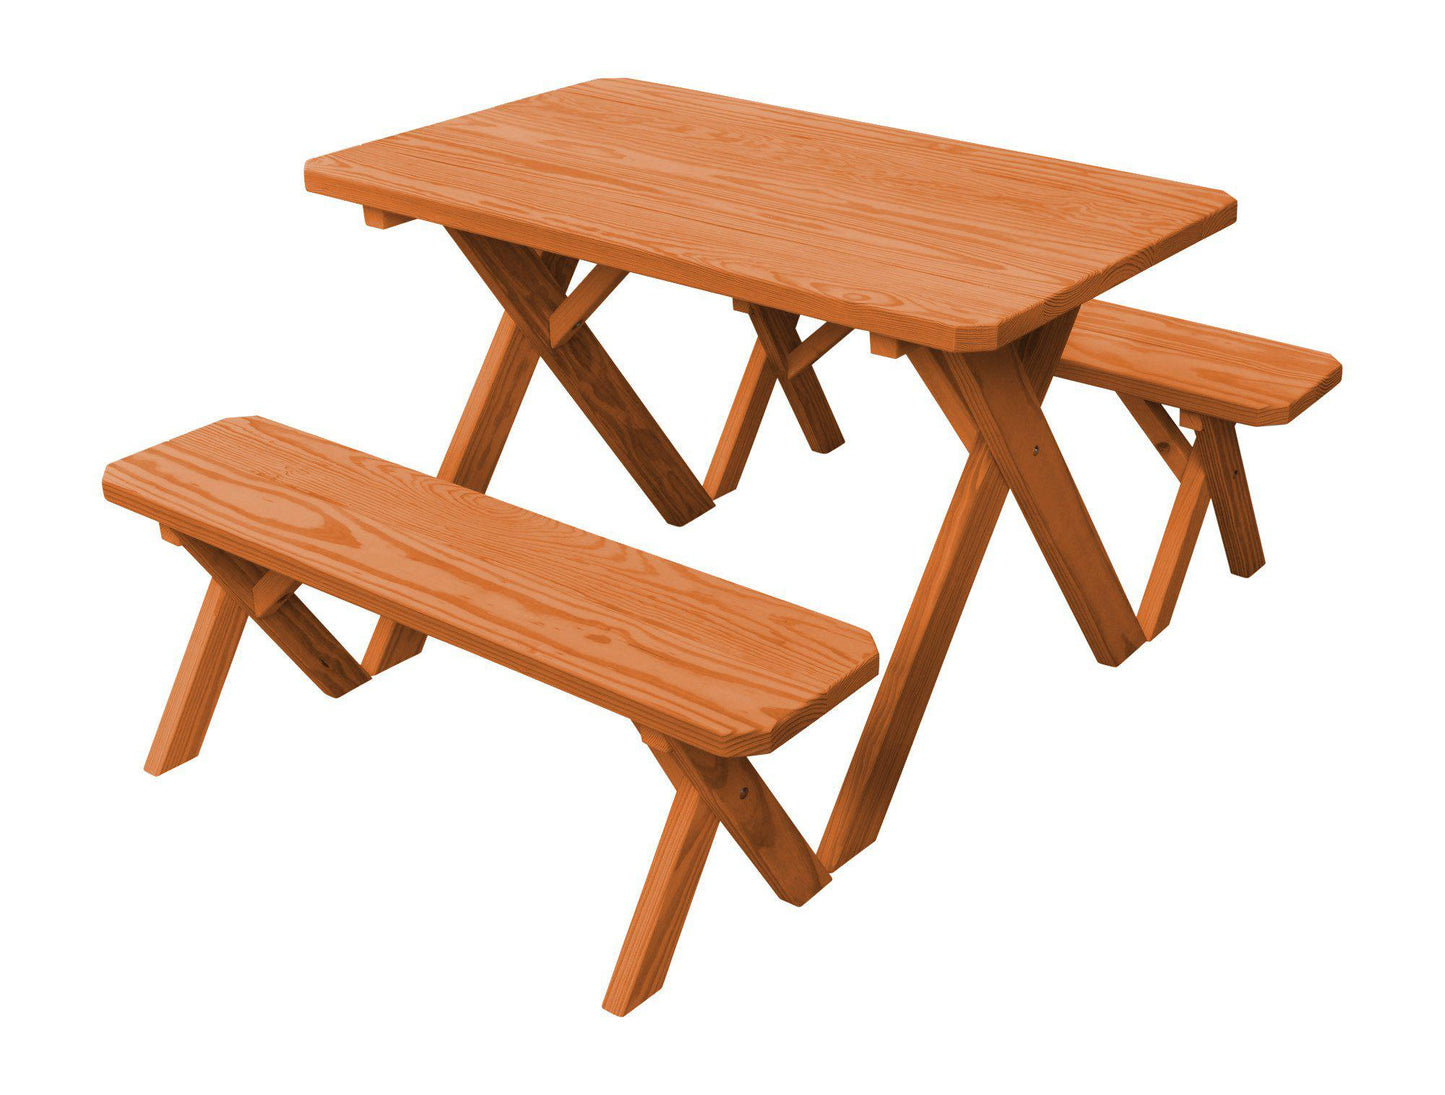 A&L Furniture Co. Pressure Treated Pine 4' Cross-leg Table w/2 Benches  - LEAD TIME TO SHIP 10 BUSINESS DAYS